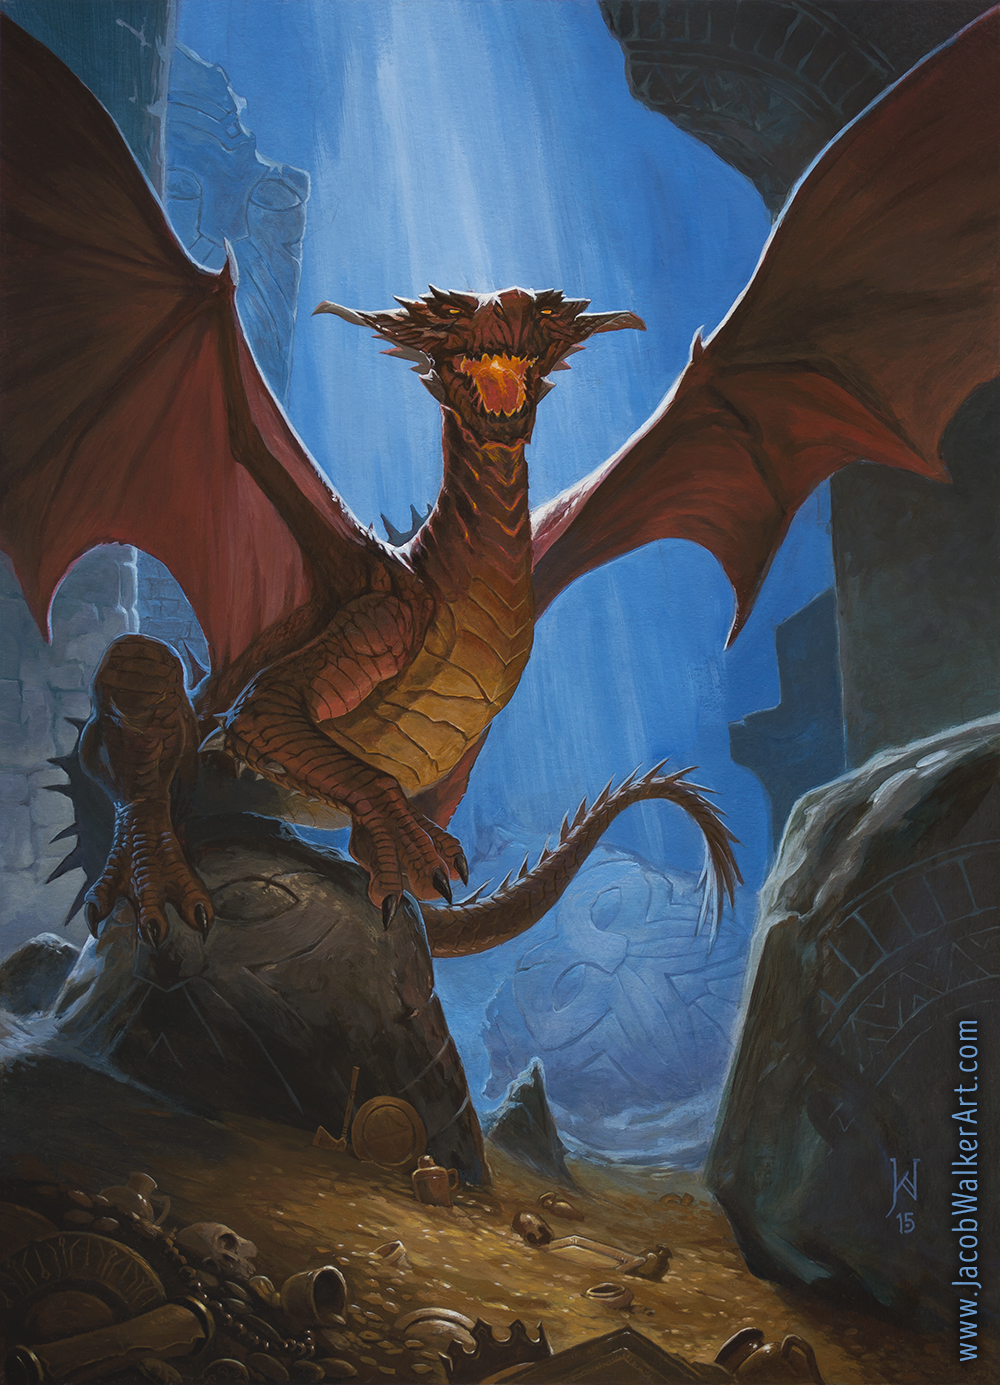 Dragons Photo: Red dragon  Dragon images, Dragon art, Dragon pictures